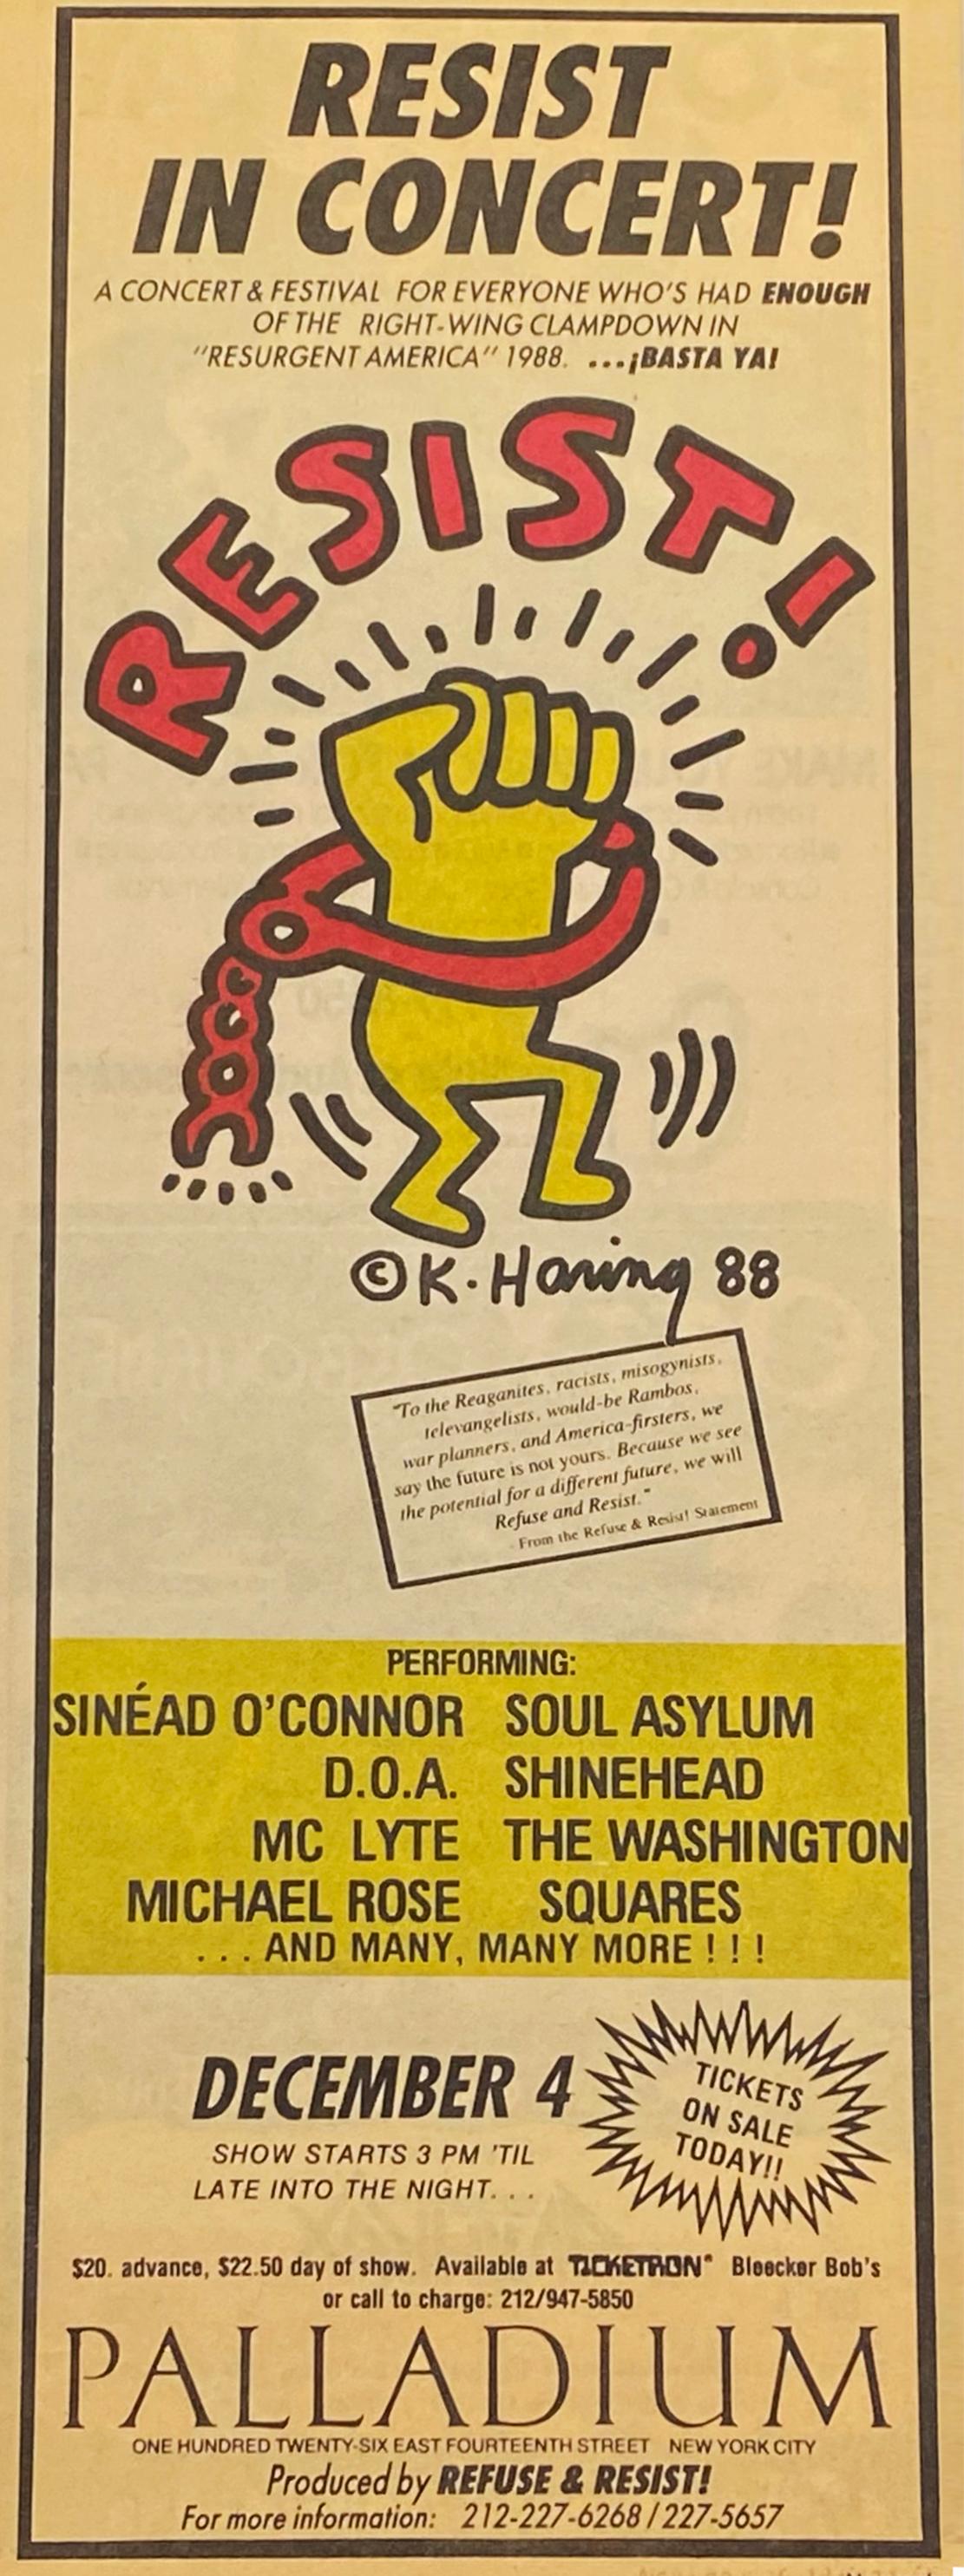 Keith Haring Resist in Concert! newspaper clipping, 1988:
Vintage original Keith Haring 1988 newspaper advertisement for Refuse and Resist produced concert December 4, 1988 at New York's Palladium nightclub. A rare Haring activist collectible